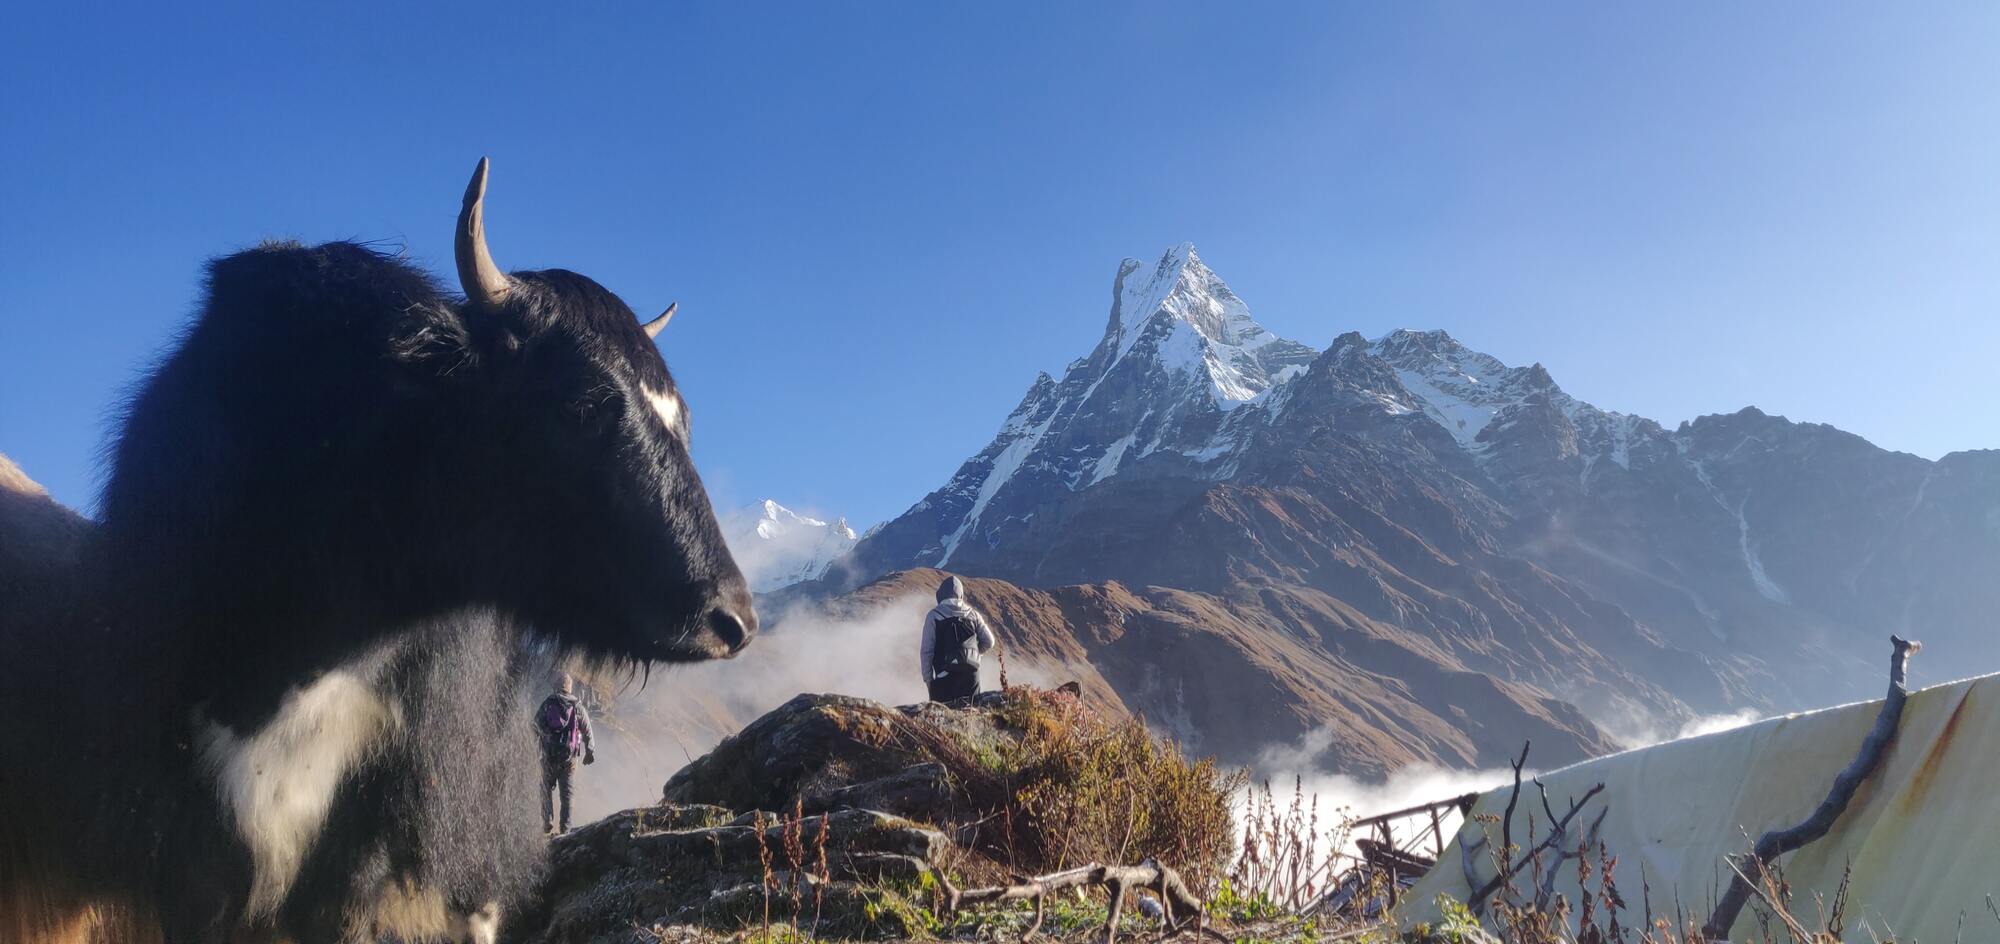 Mardi Himal Base Camp with view of Machhapuchhre, Nepal - By Mountain People